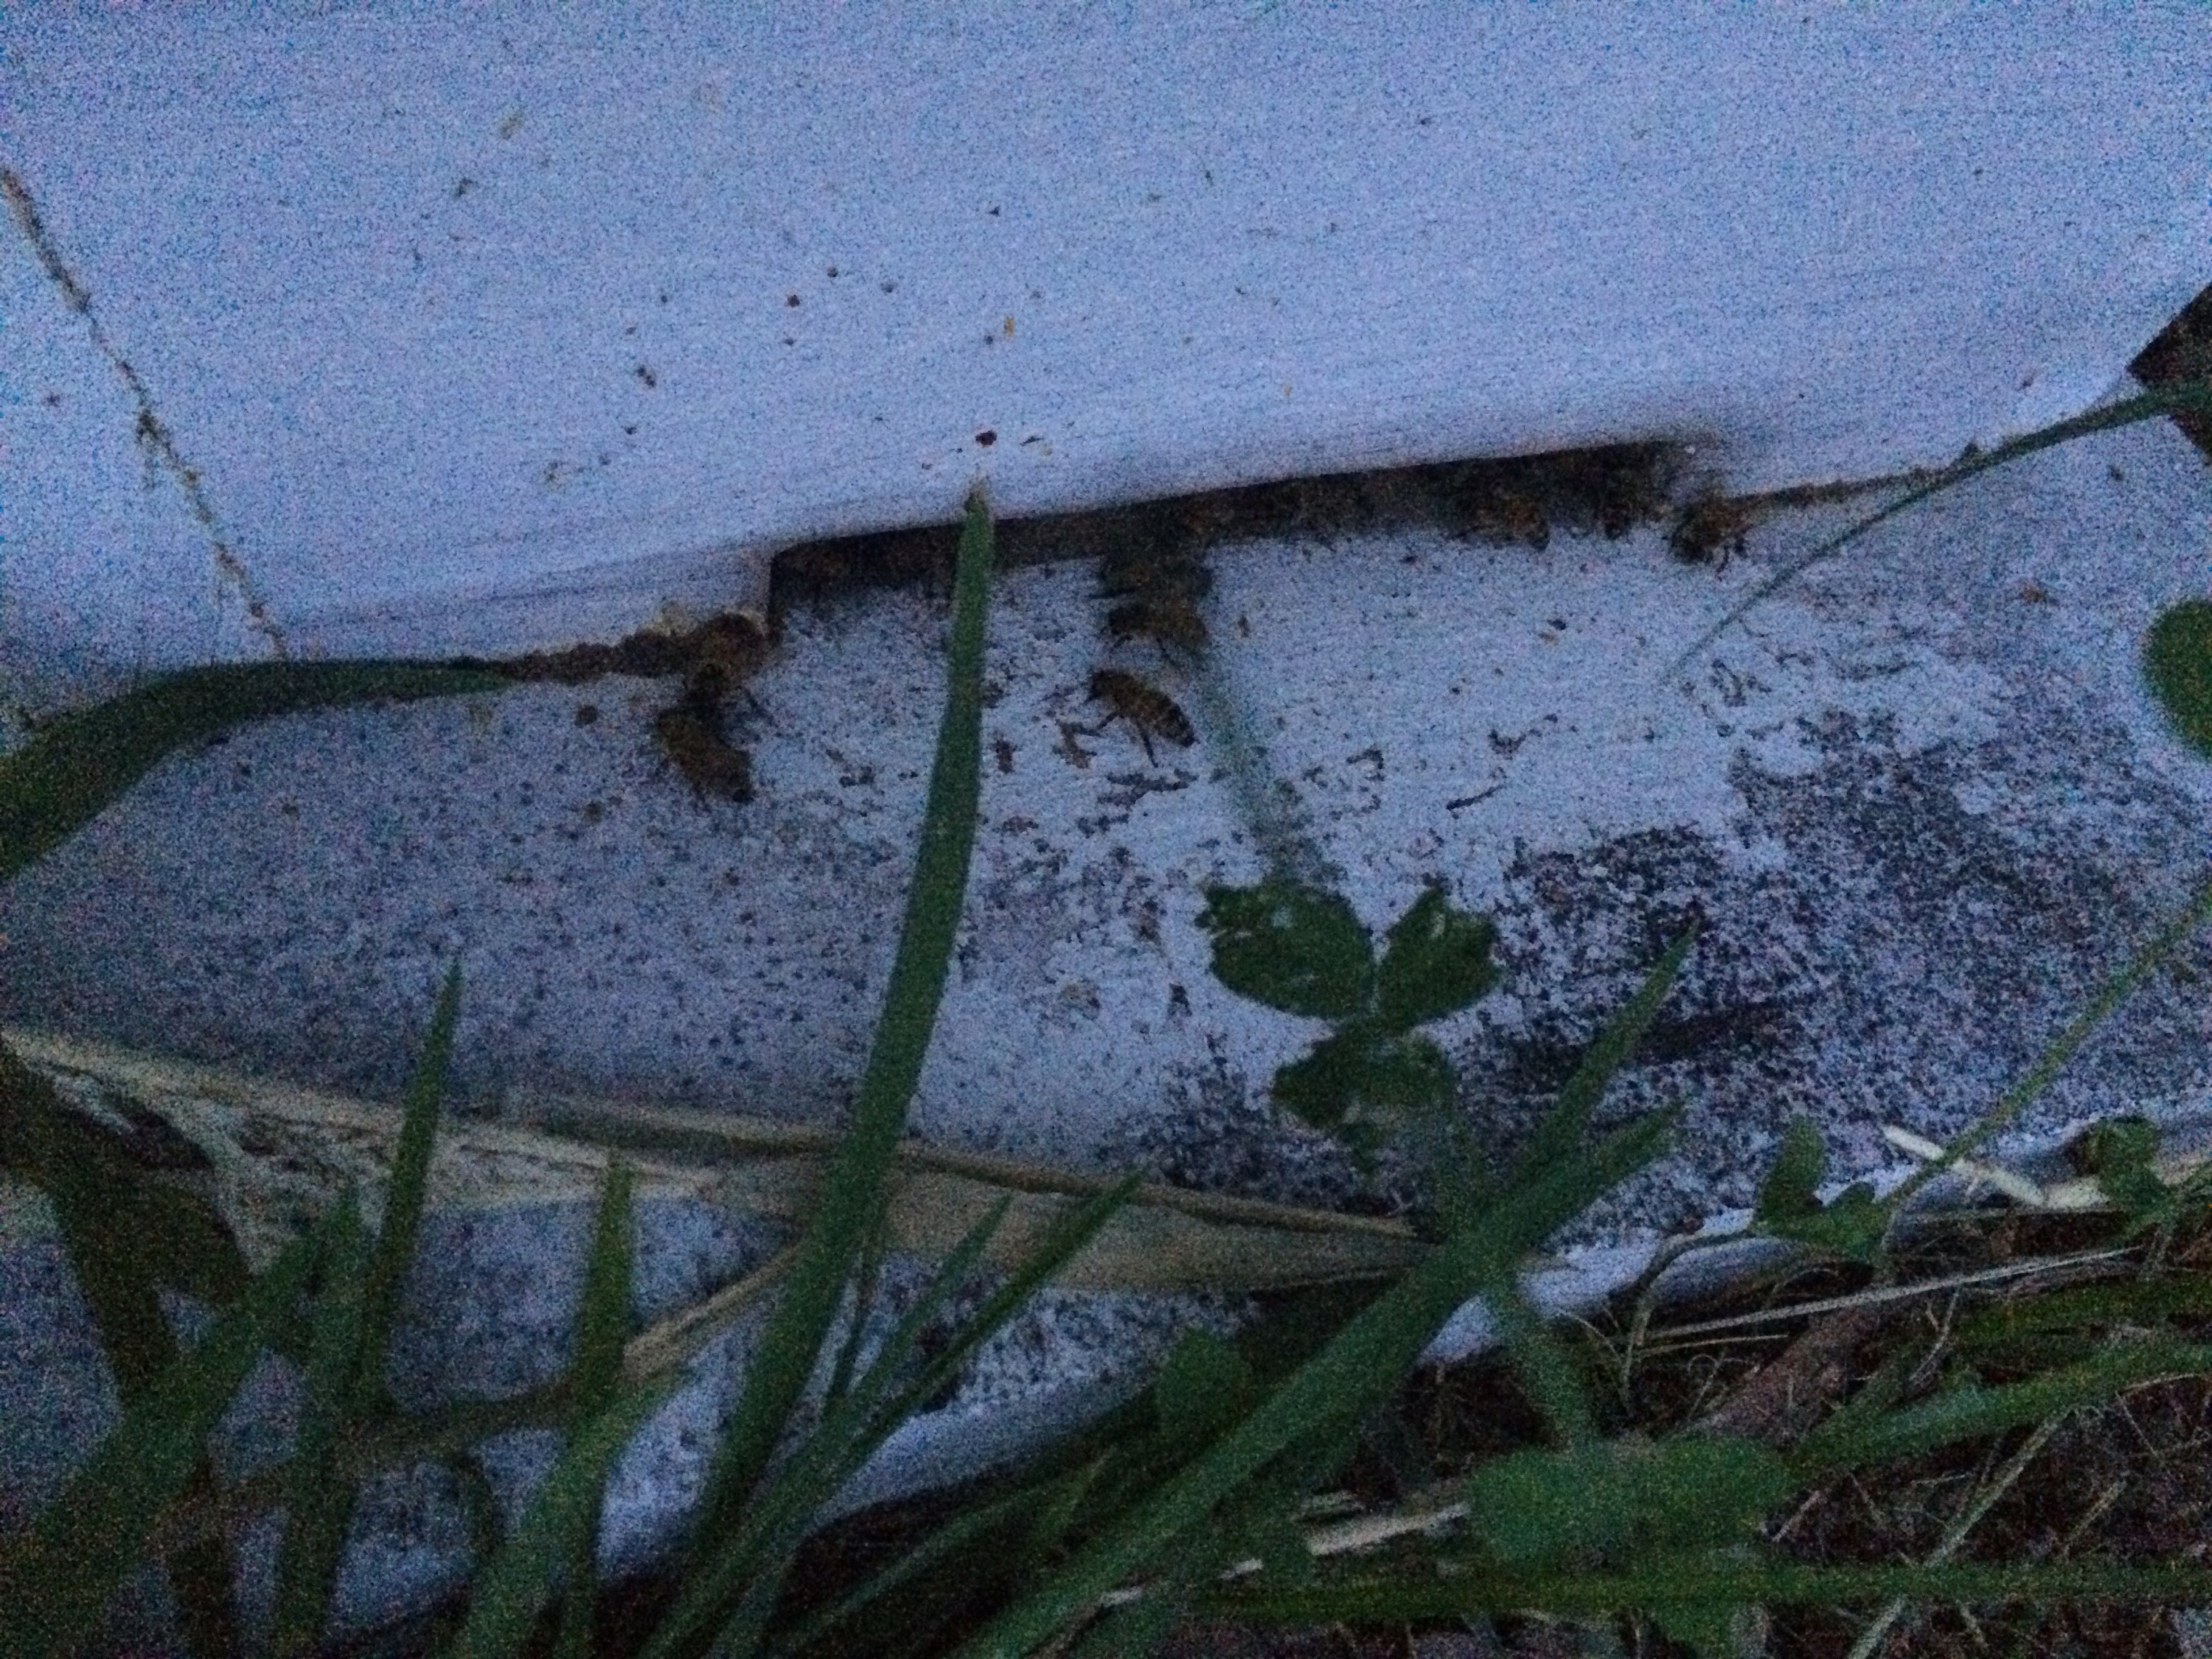 Bees on the landing board